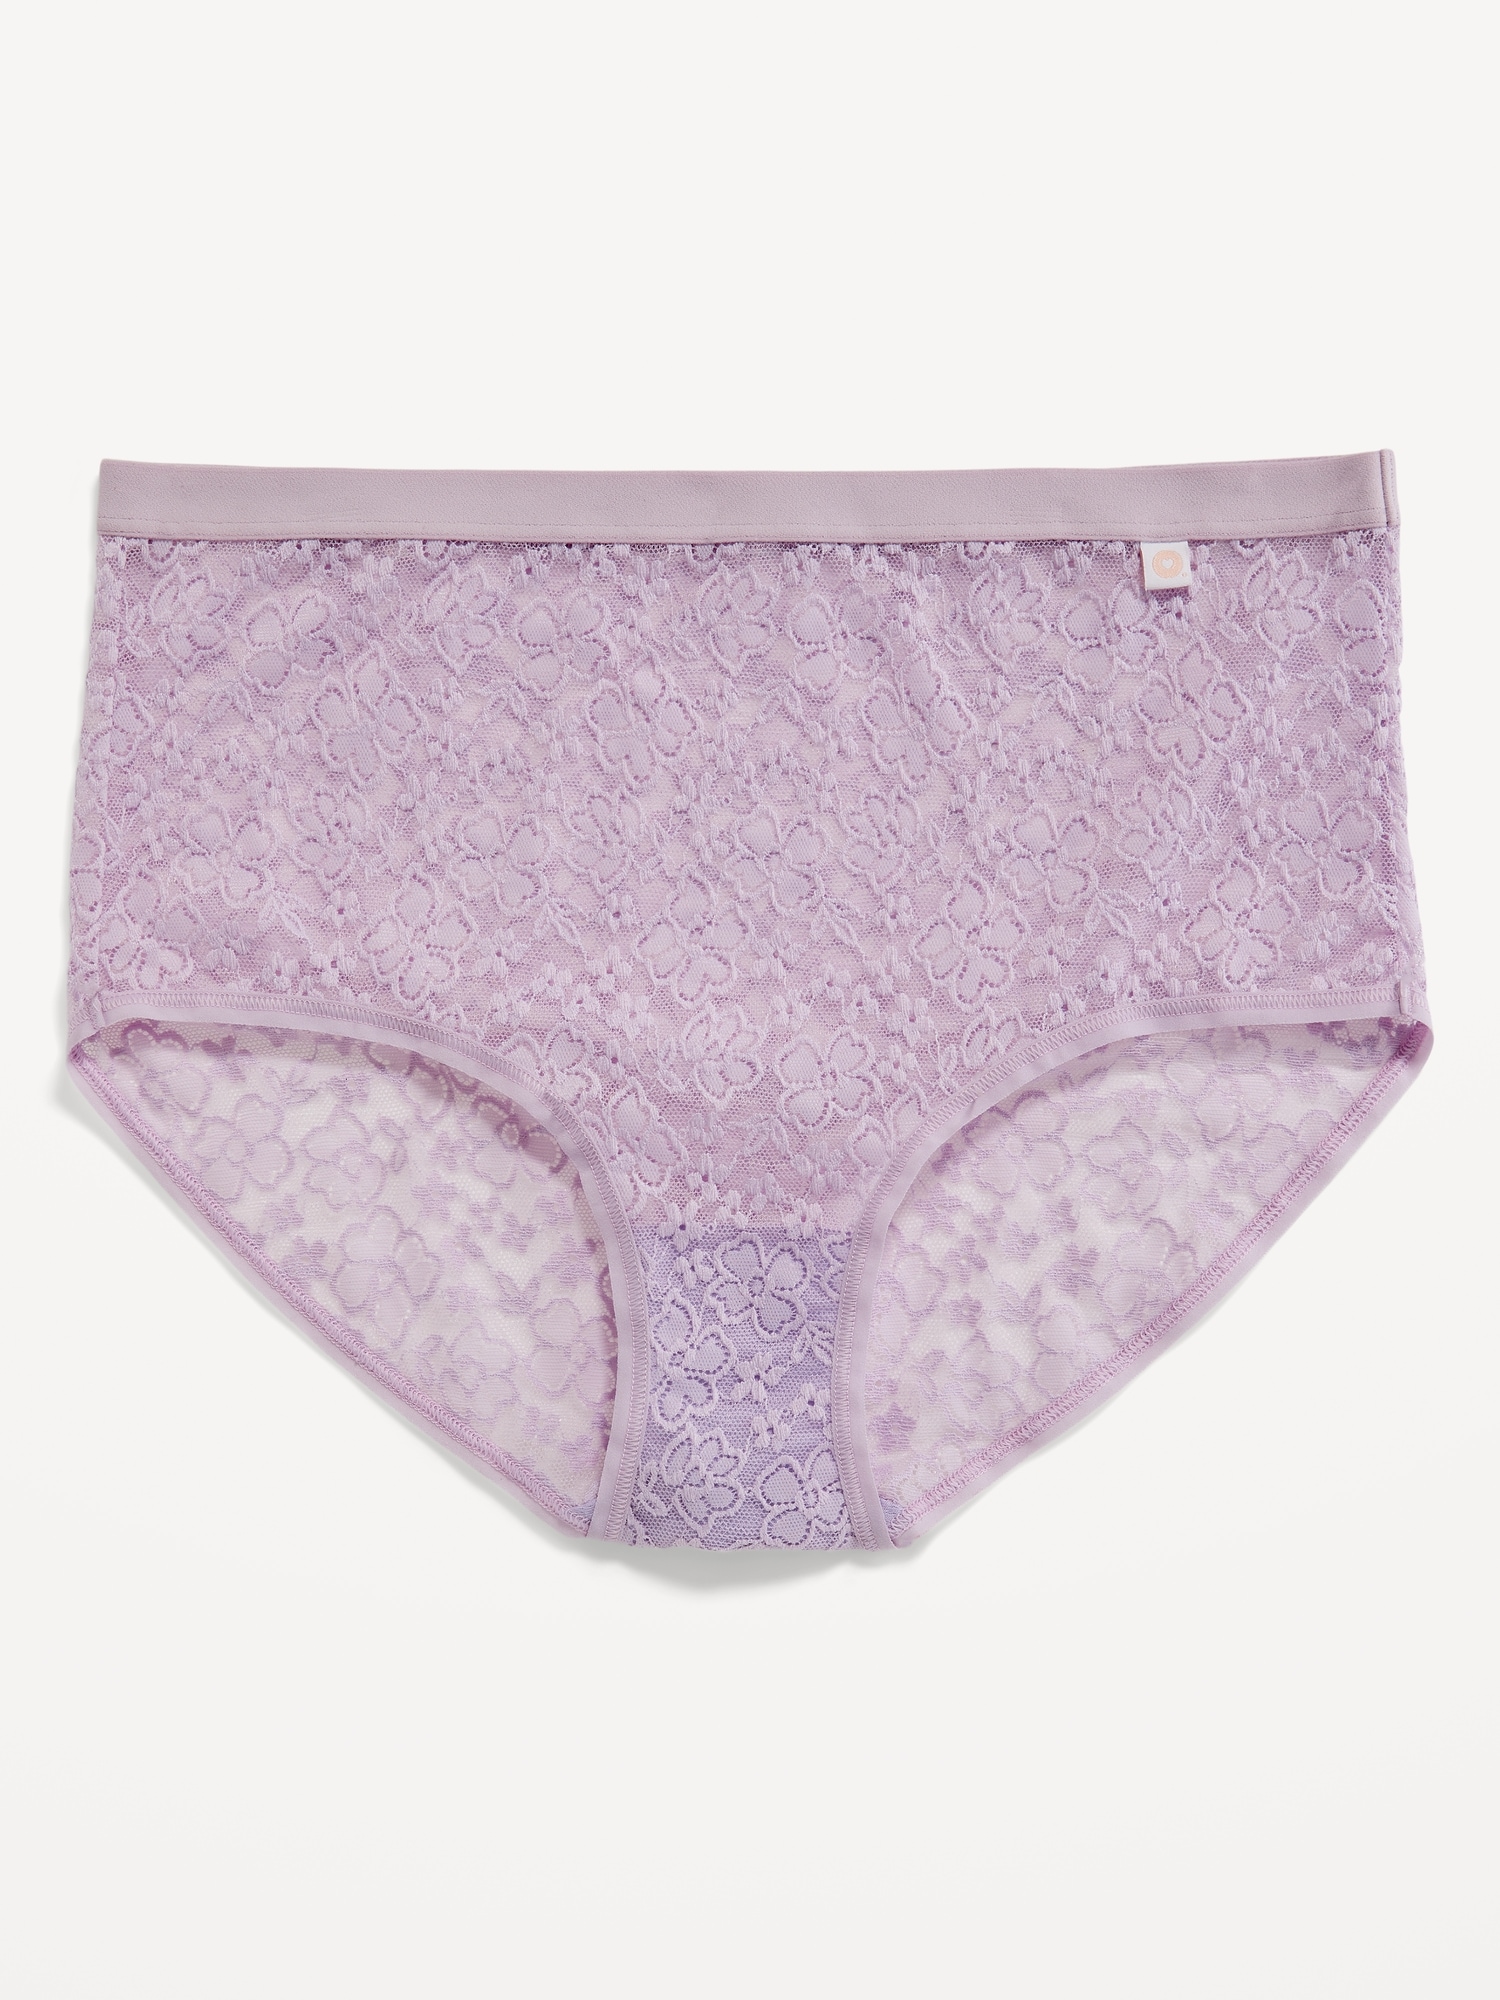 Tea Dyed Historical Knickers Undergarments with Lace Trim, for Victori –  Tidal Cool